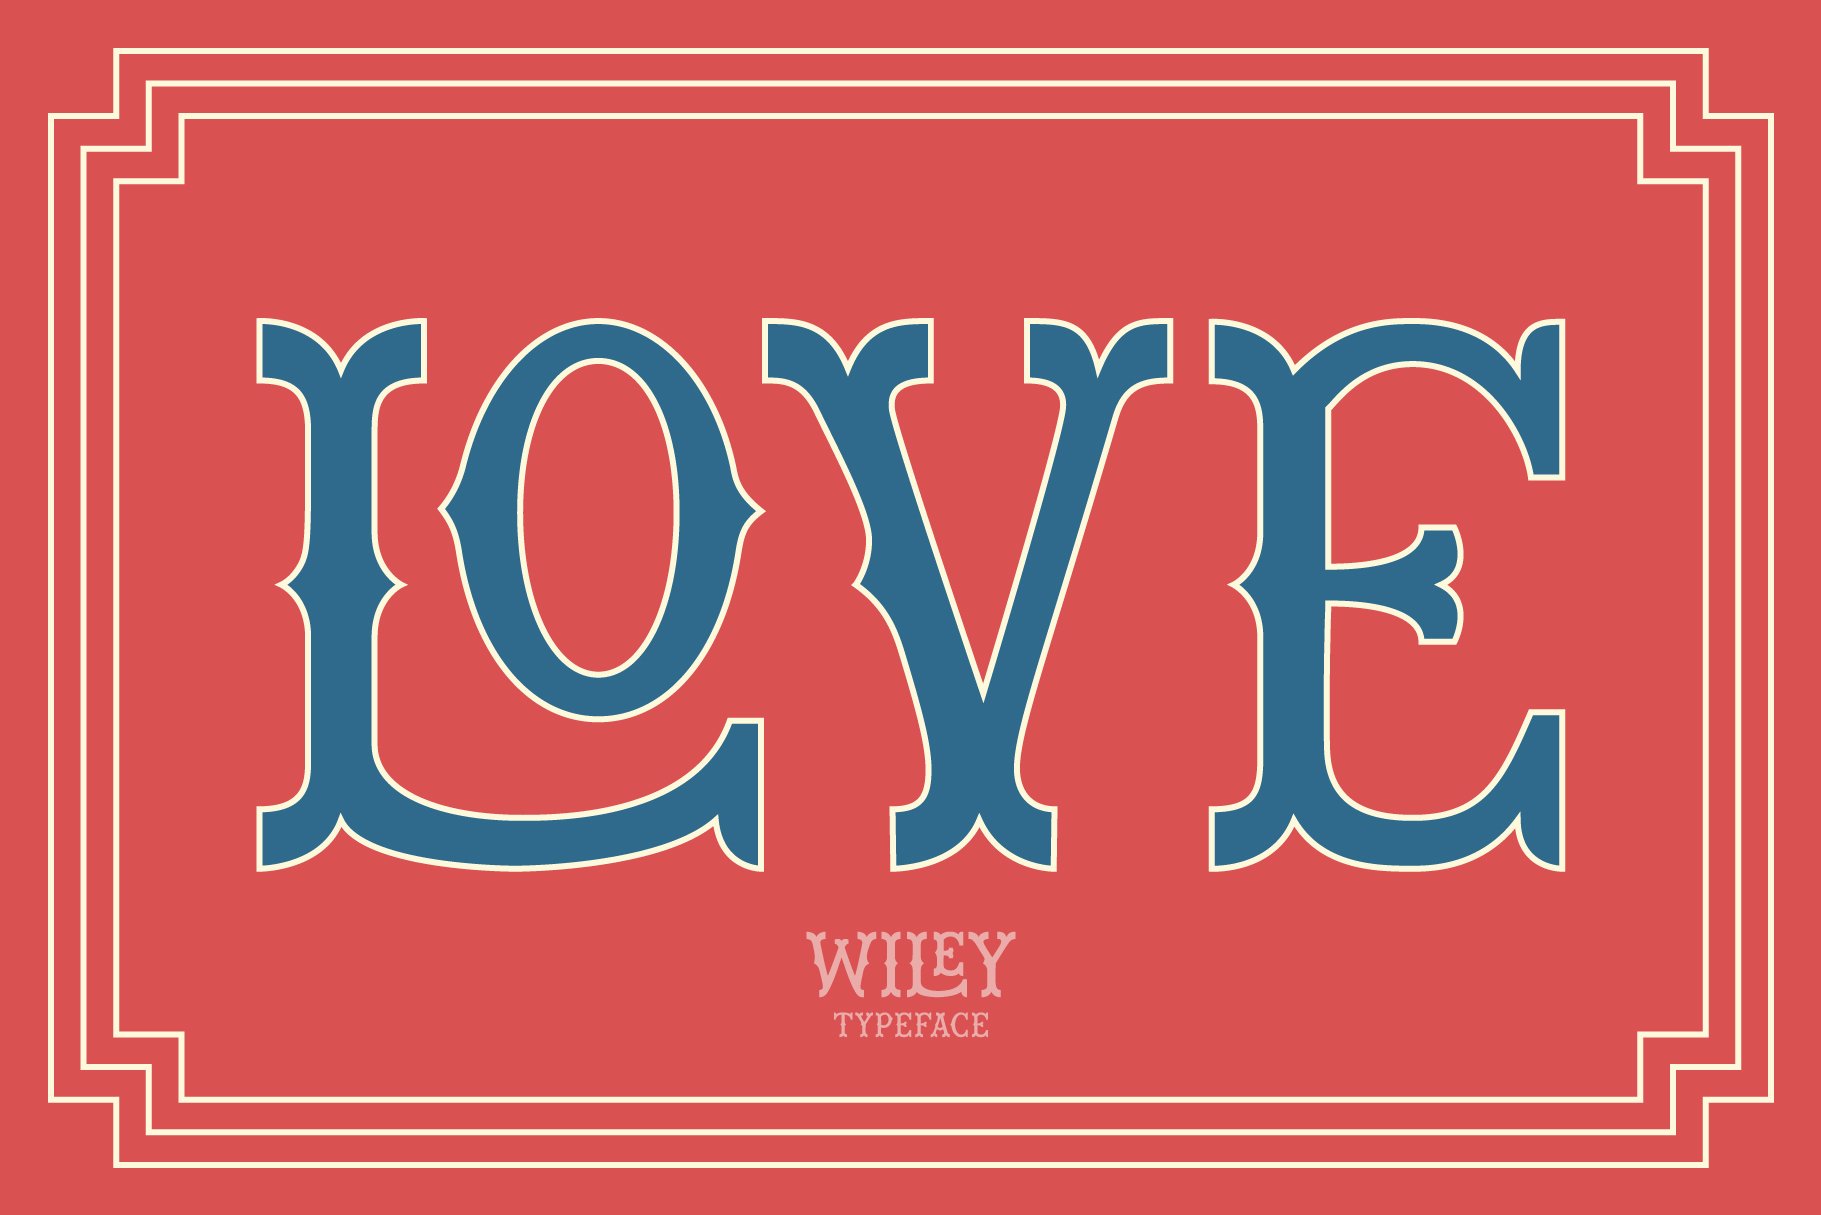 wiley font molly suber thorpe 09 81